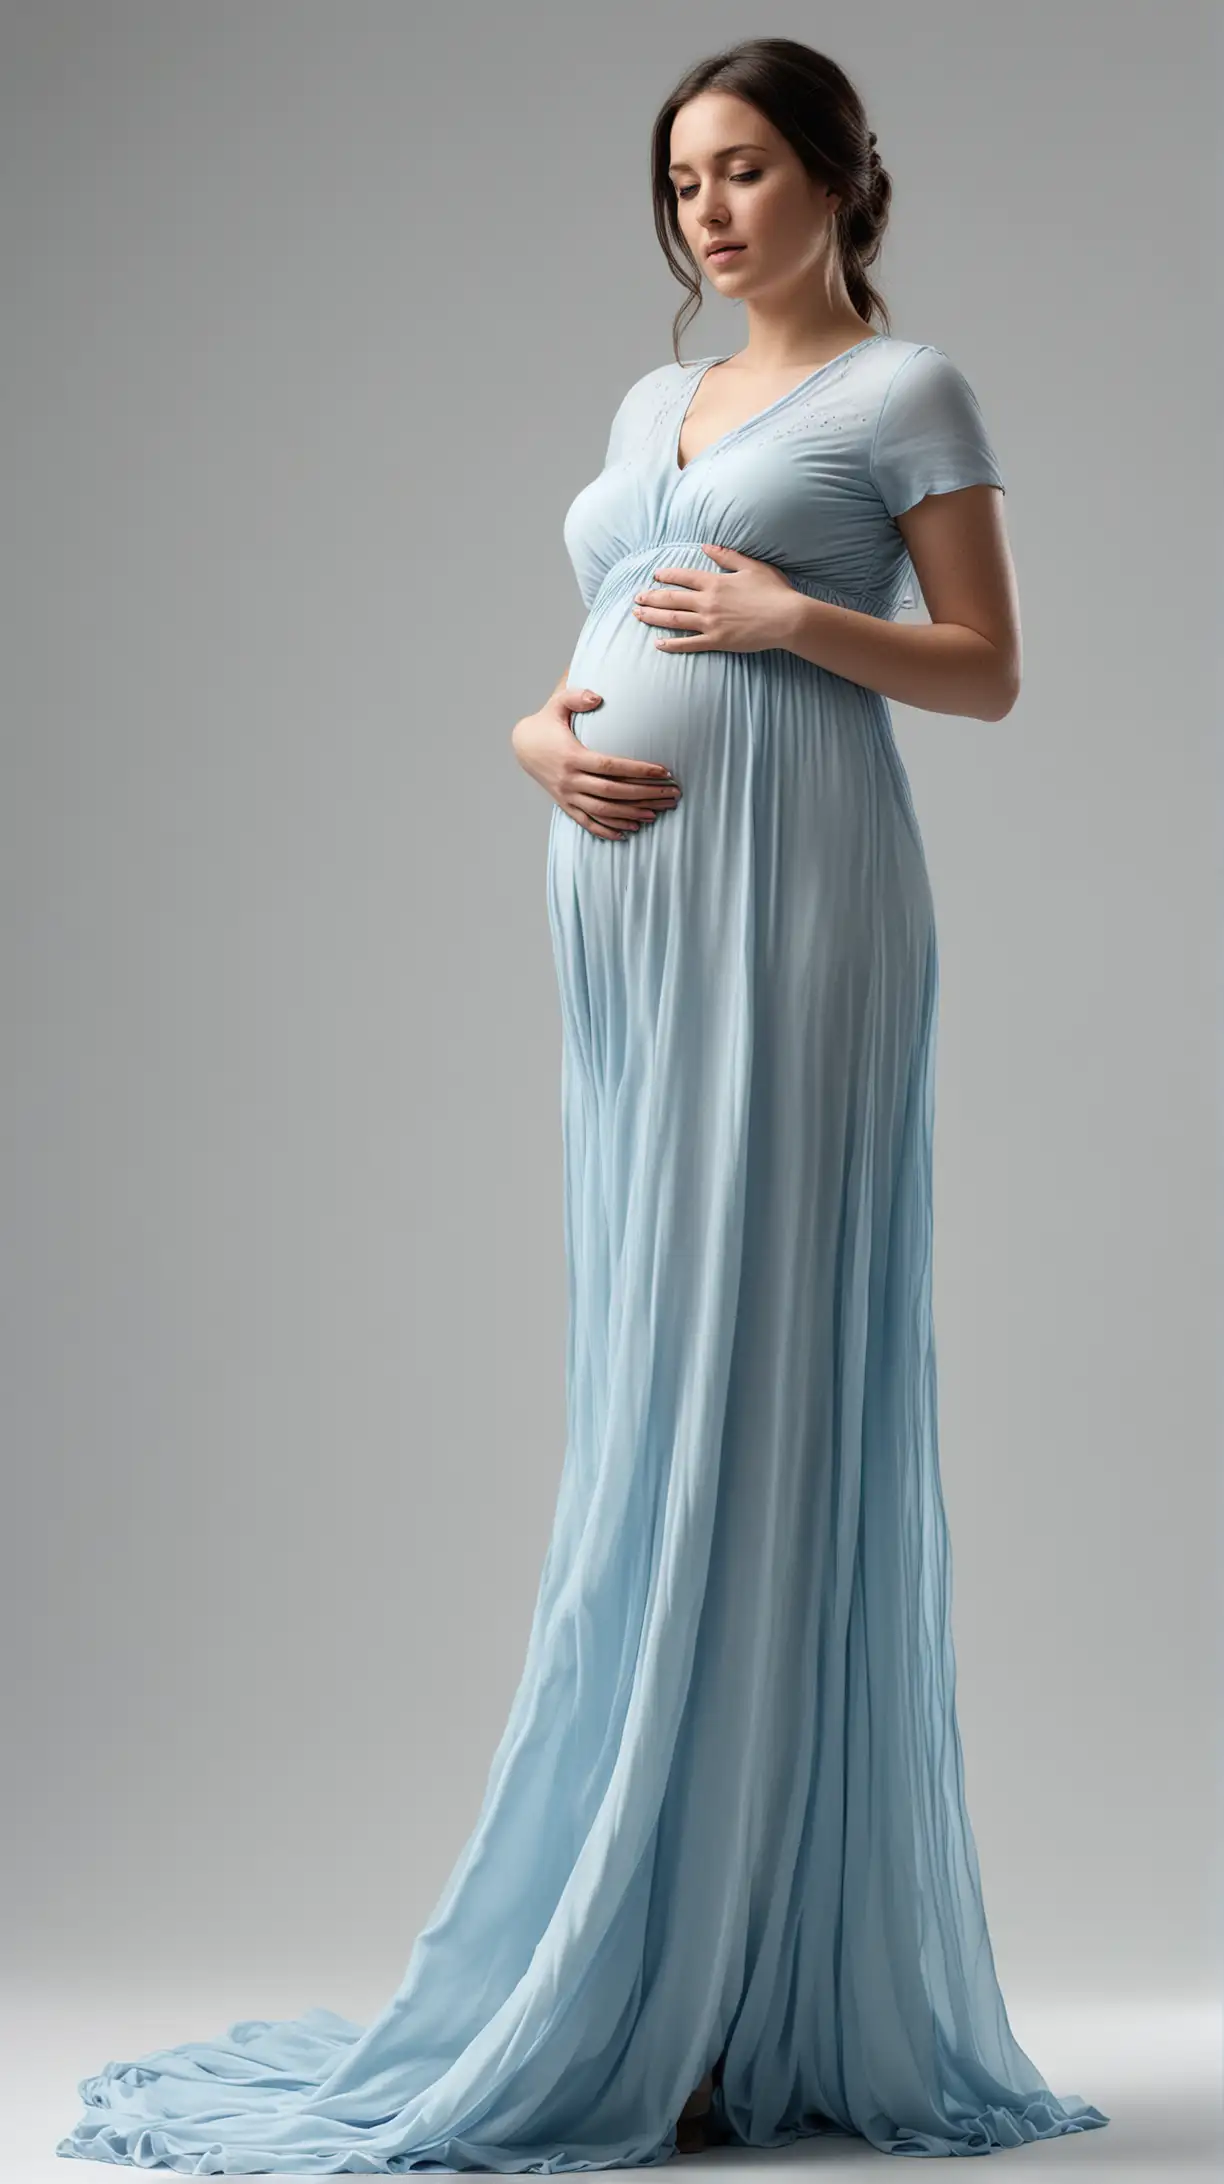 Professional Studio Photo of Pregnant Woman in Light Blue Flowing Dress